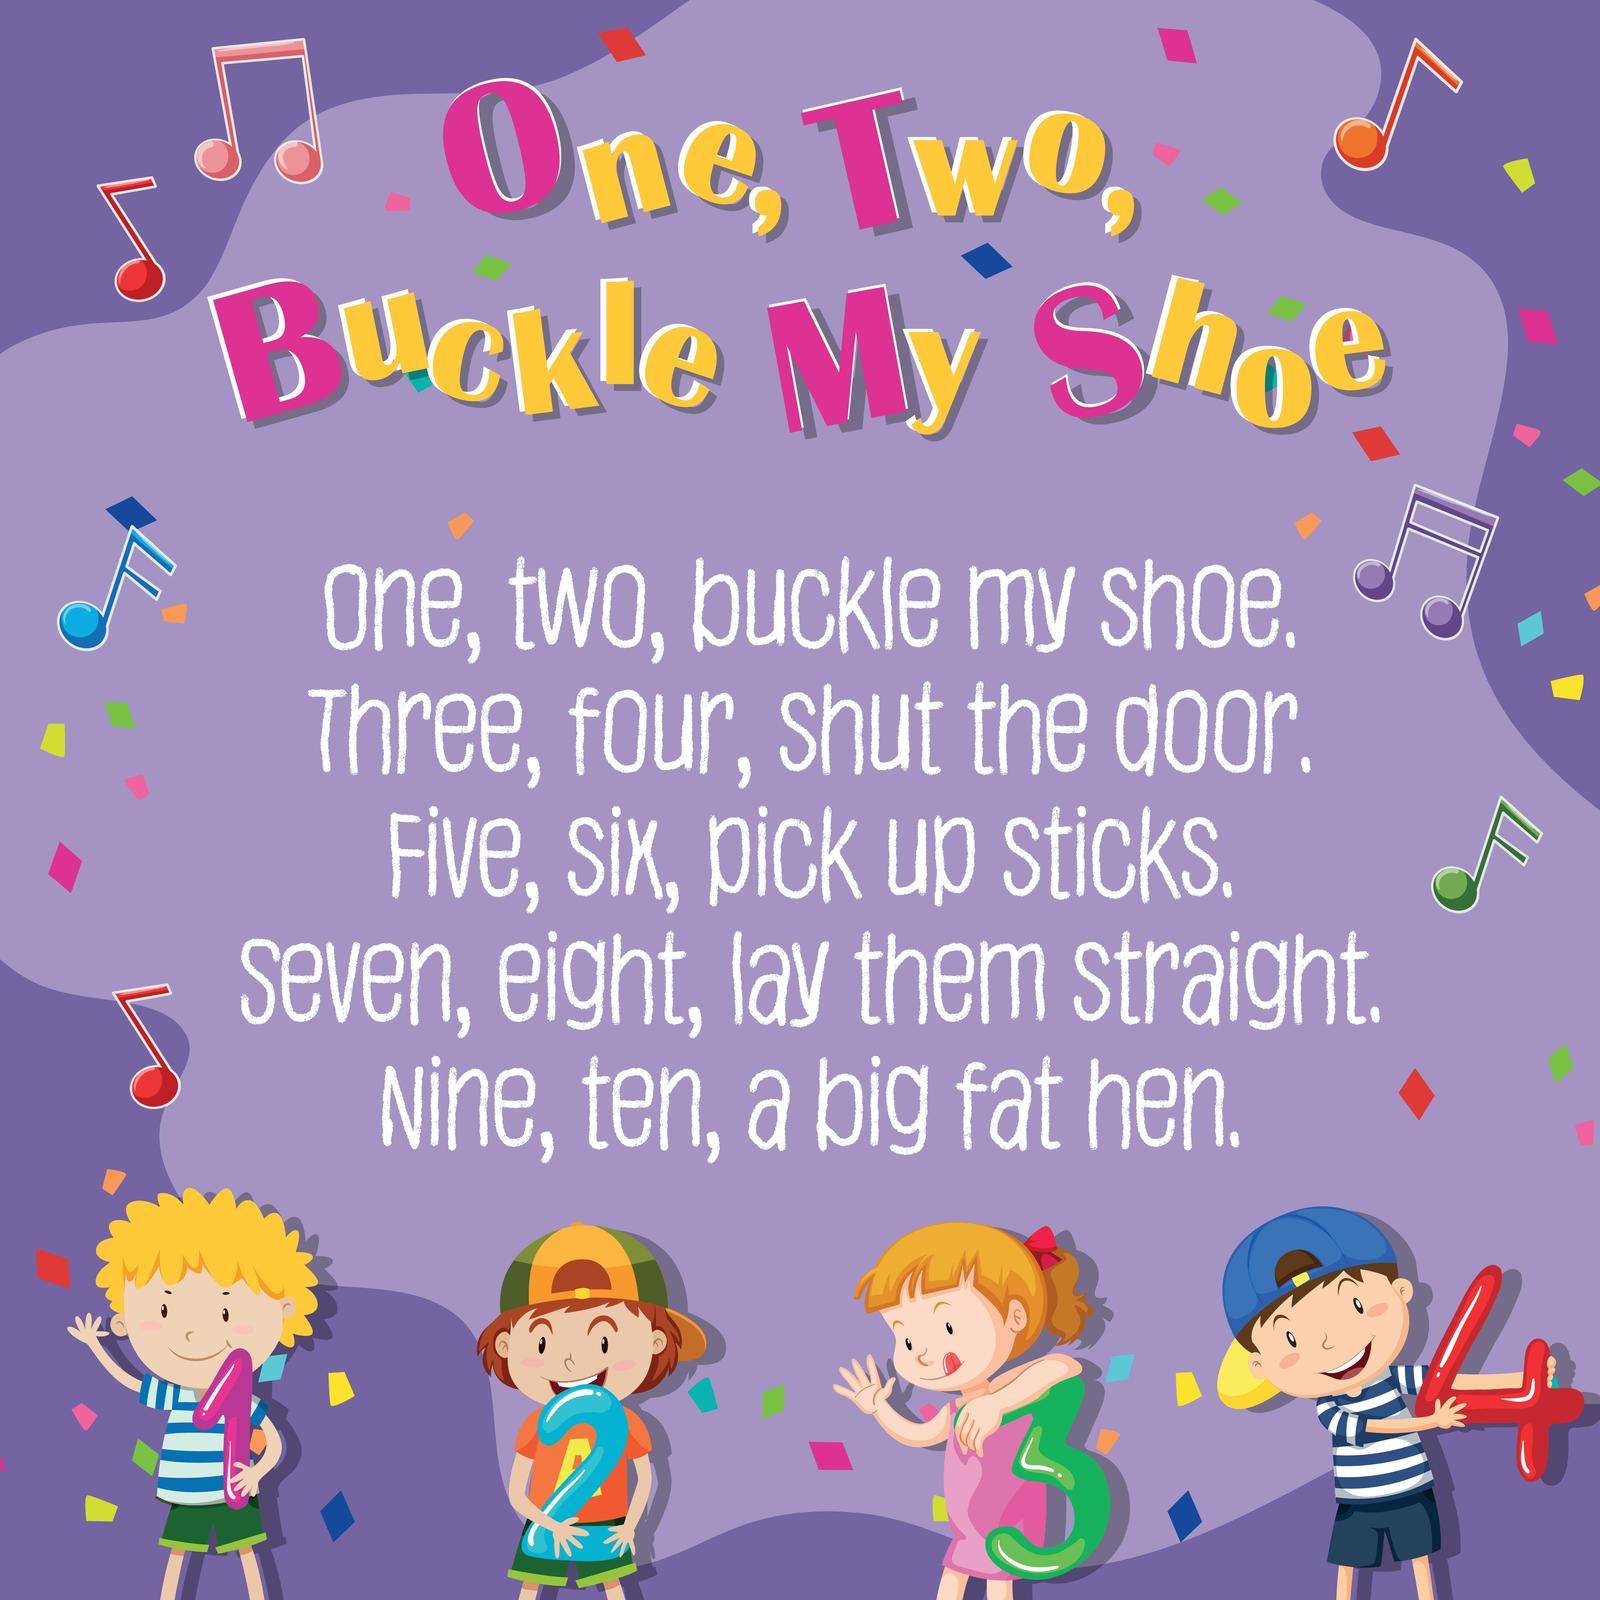 One two buckle my shoe poster illustration